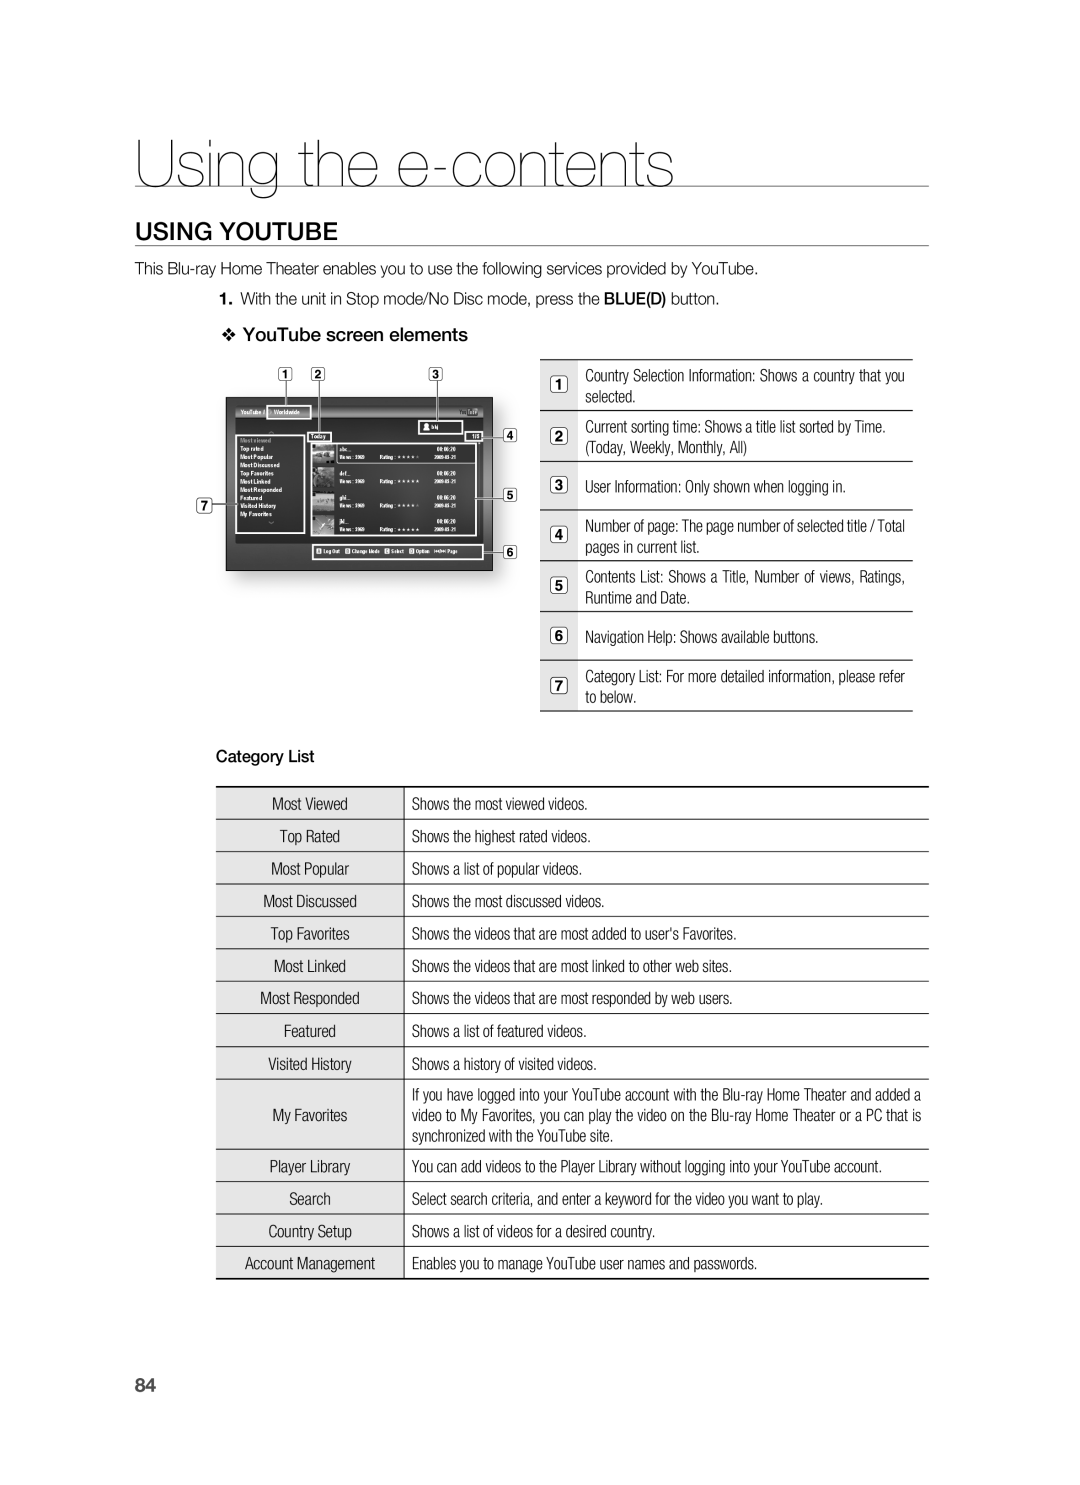 Samsung HT-BD8200 user manual Using Youtube, Using the e-contents, YouTube screen elements 